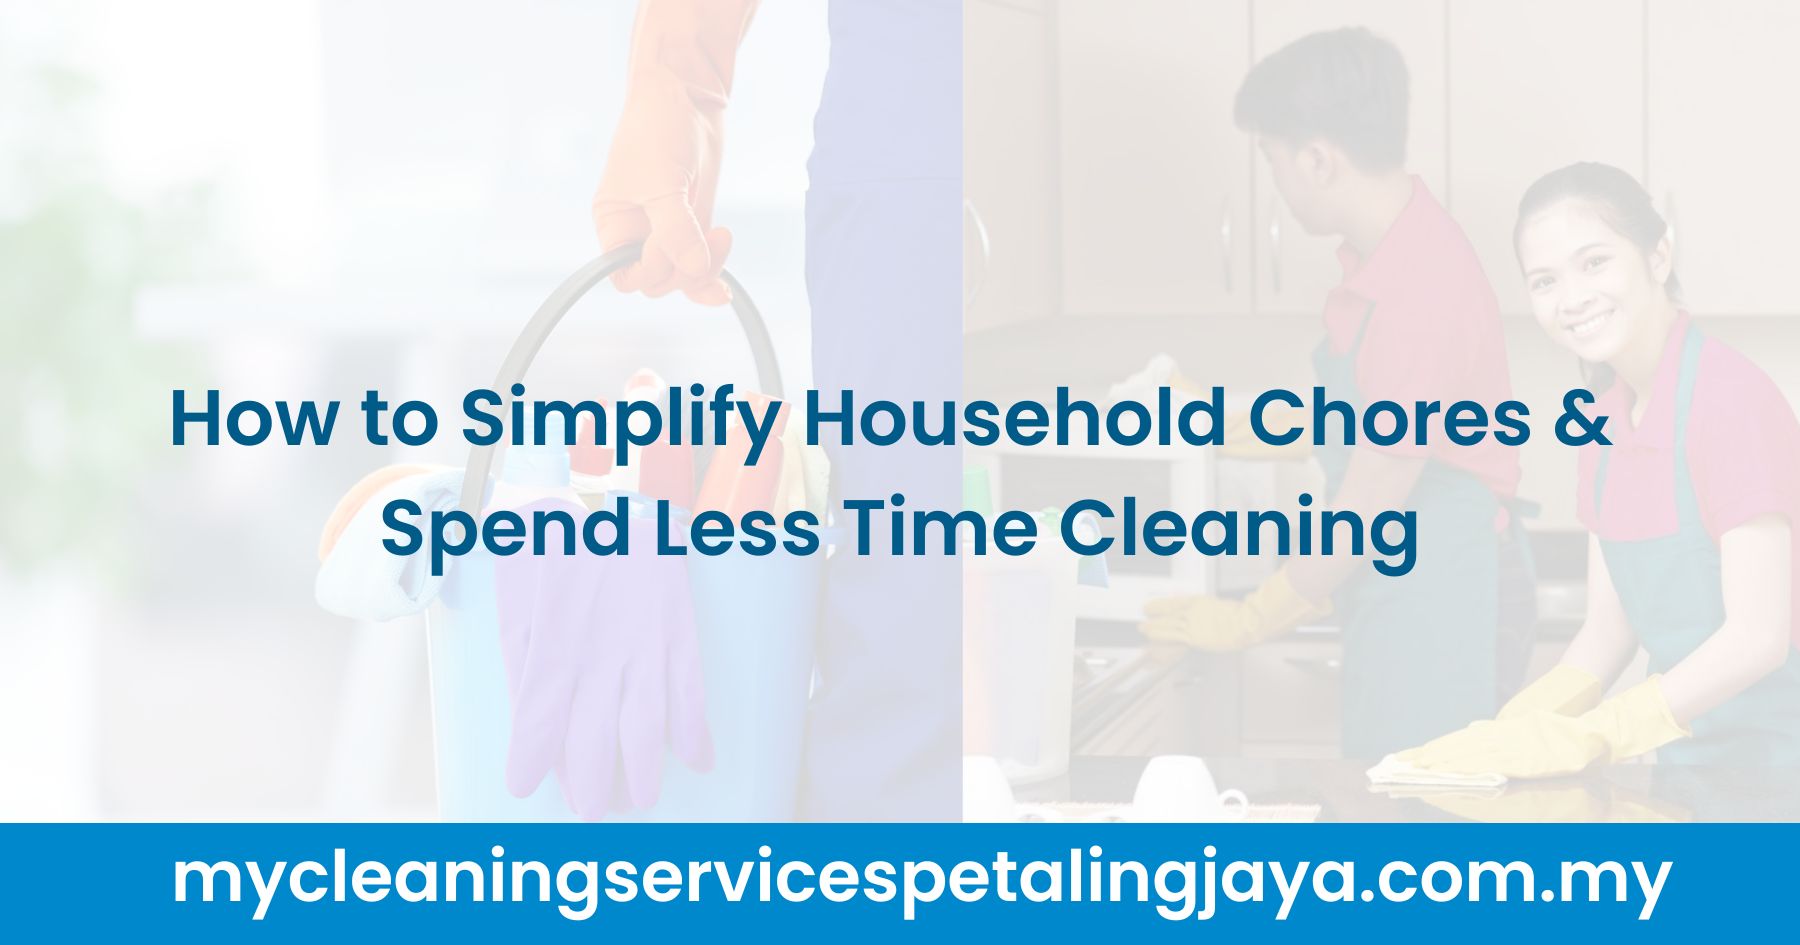 How to Simplify Household Chores & Spend Less Time Cleaning